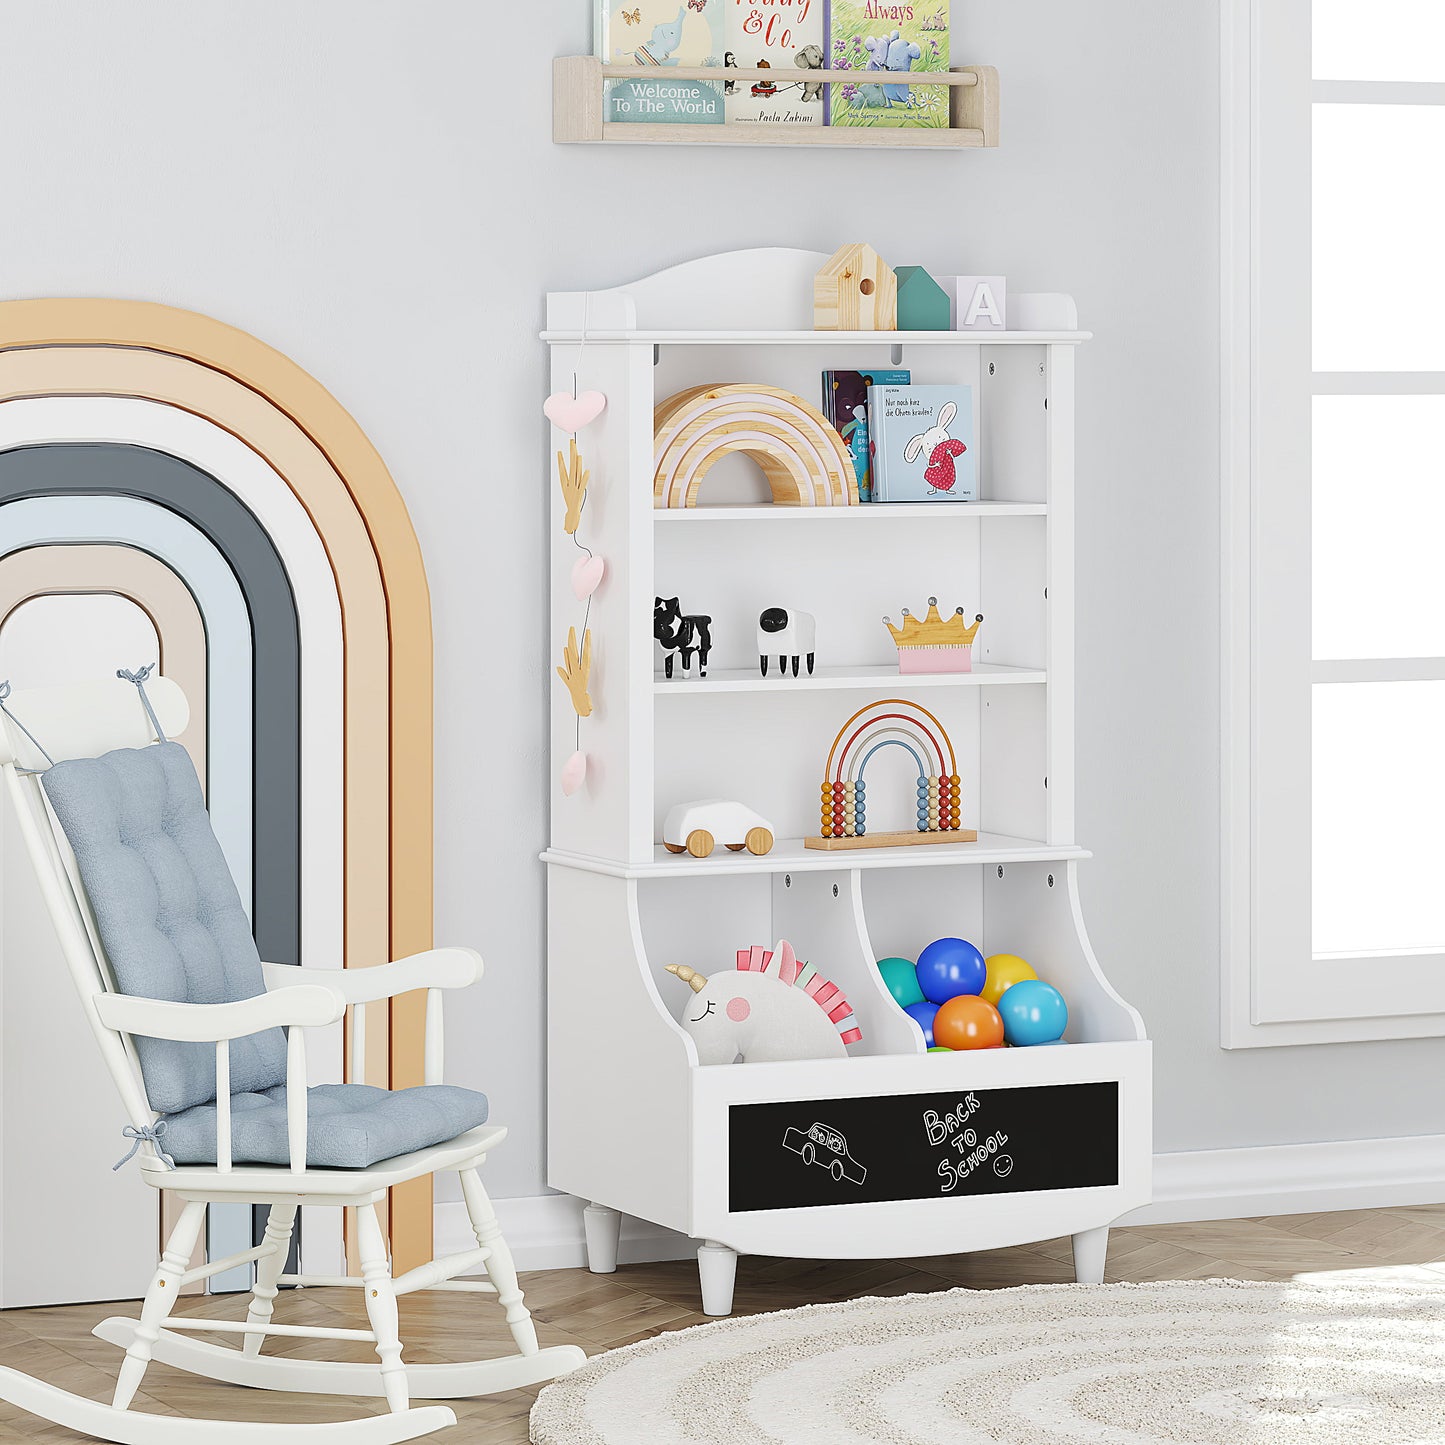 UTEX Kids Bookshelf and Toy Storage, Kids Wood Bookcase with Blackboard and Cubbies, Open Kids Bookshelf and Toy Organizer Cabinet, Kids Bookshelves Display Stand for Toddlers, White